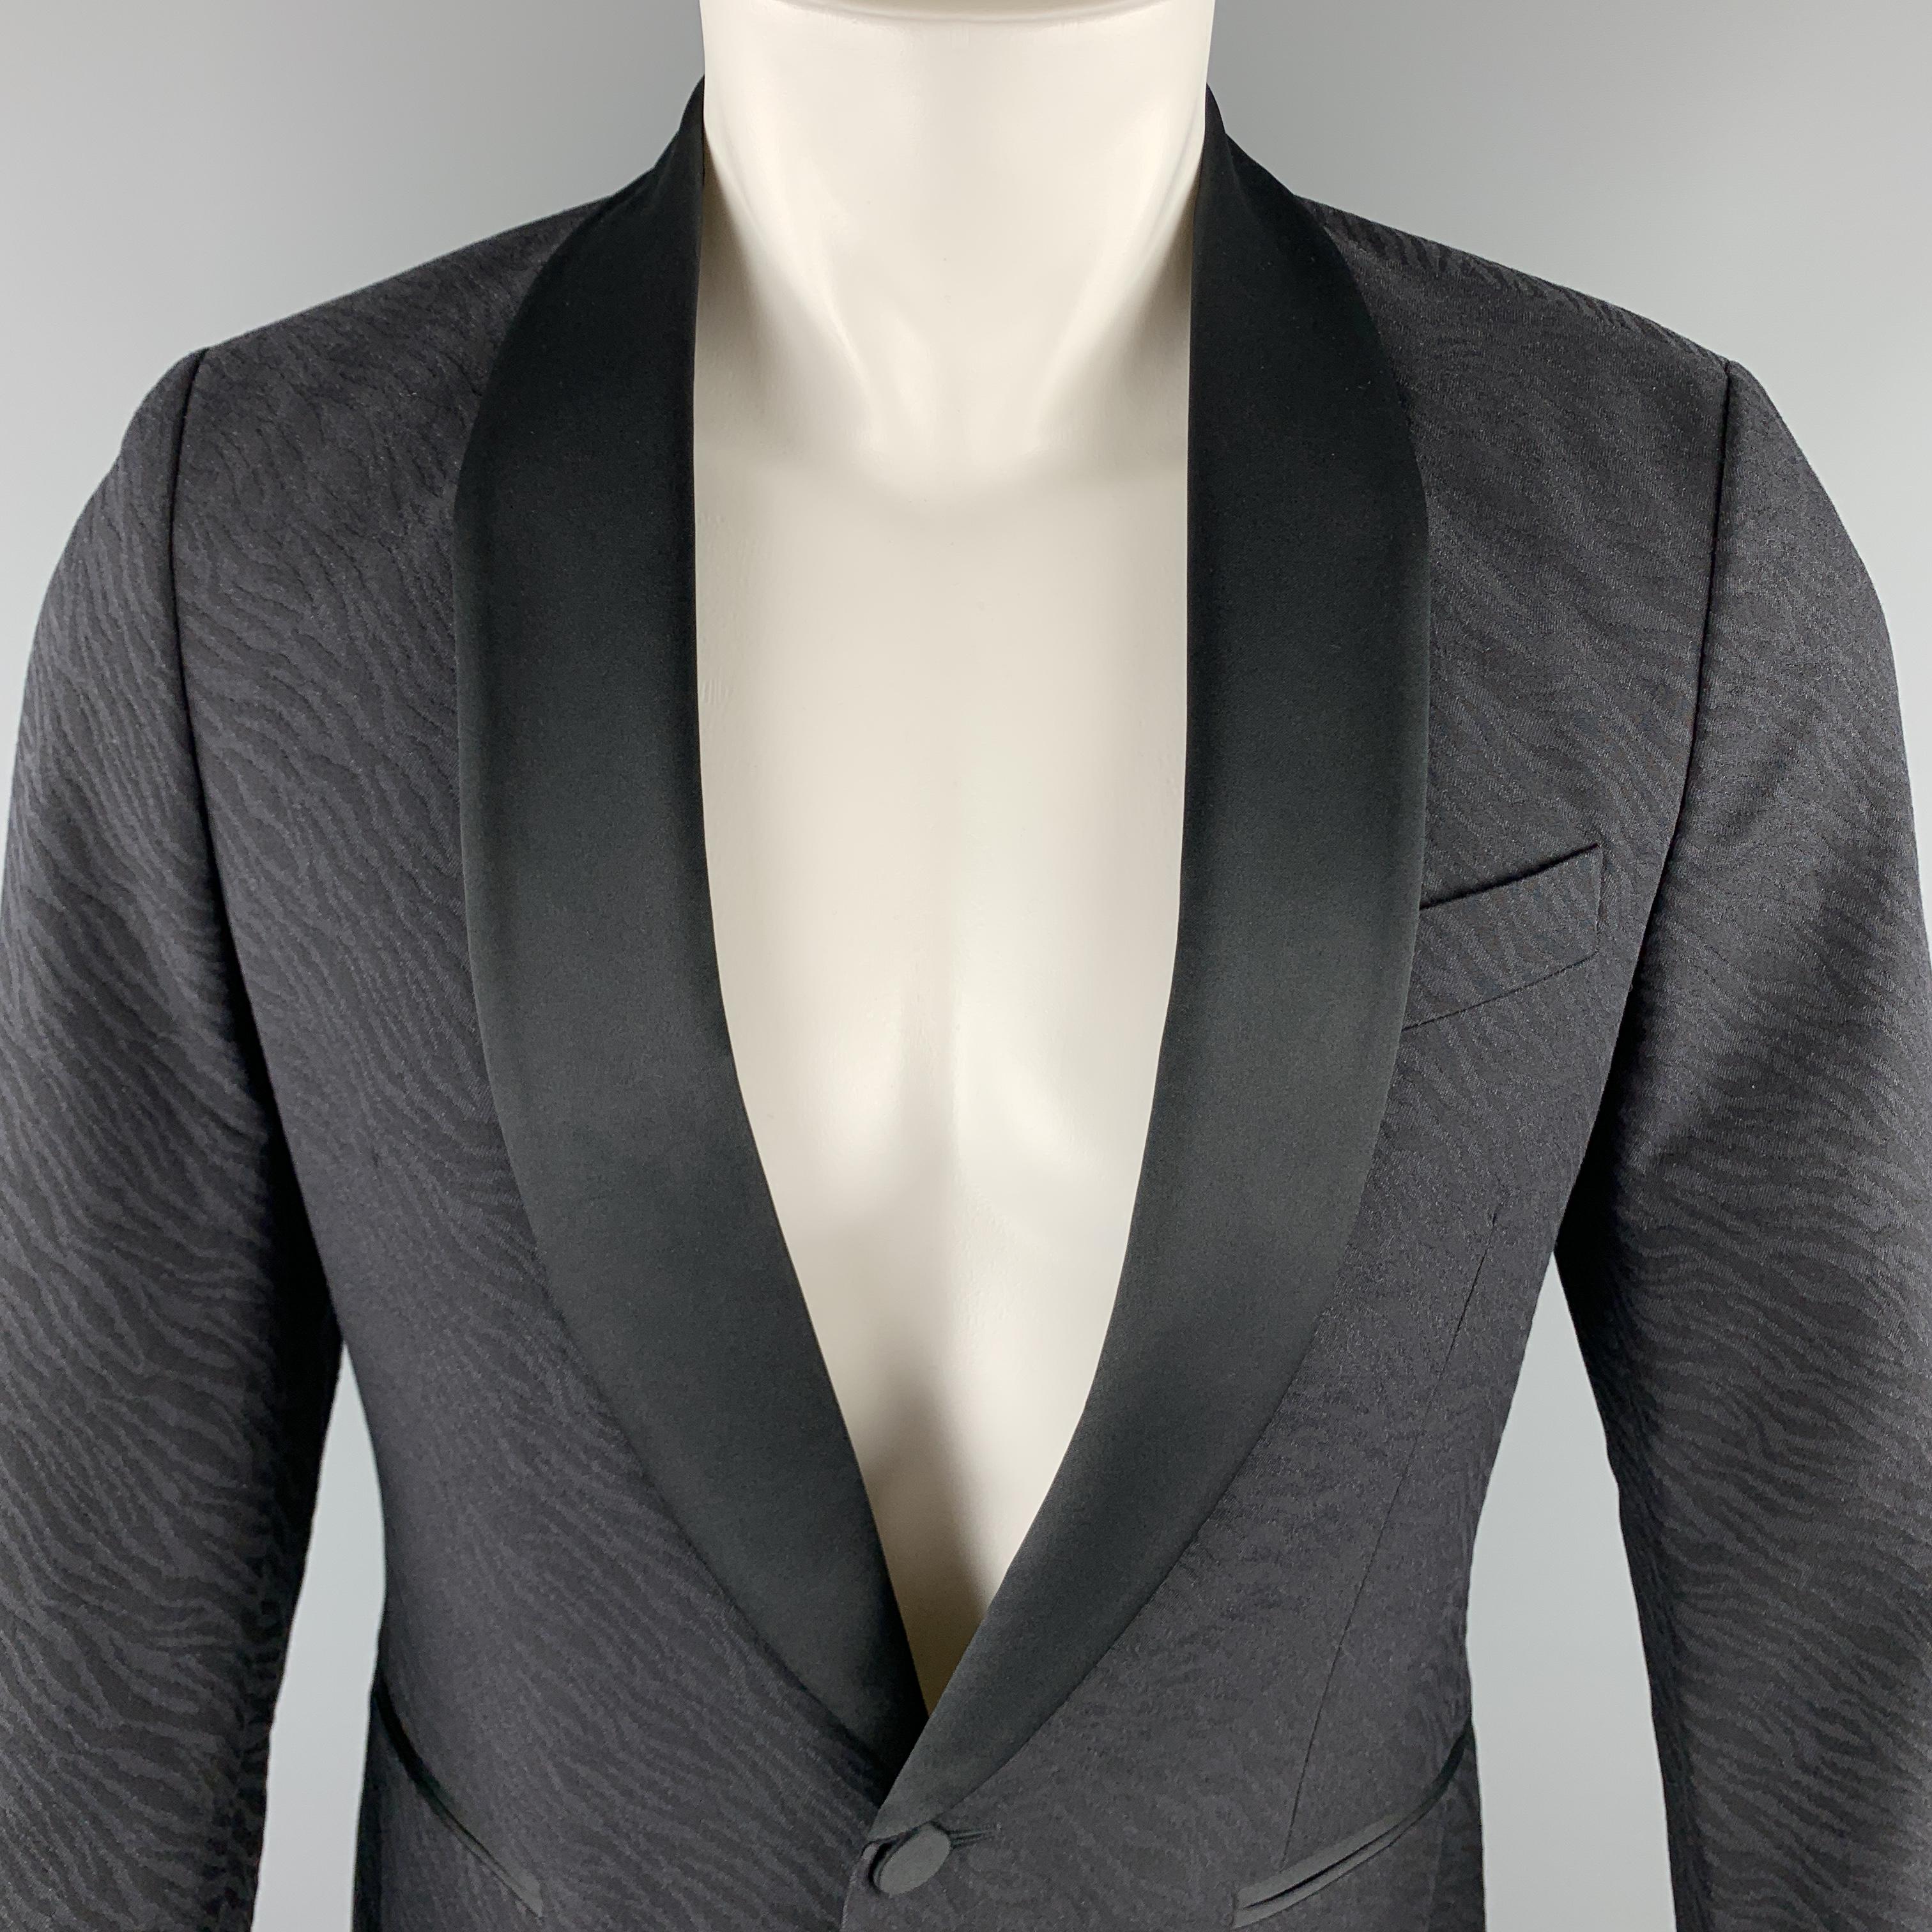 J. LINDEBERG sport coat comes in a black jacquard cotton / wool material, featuring a contrast black solid shawl collar, a single button at closure, single breasted, a single button at cuff, slit pockets, and a double vent at back. 

Excellent